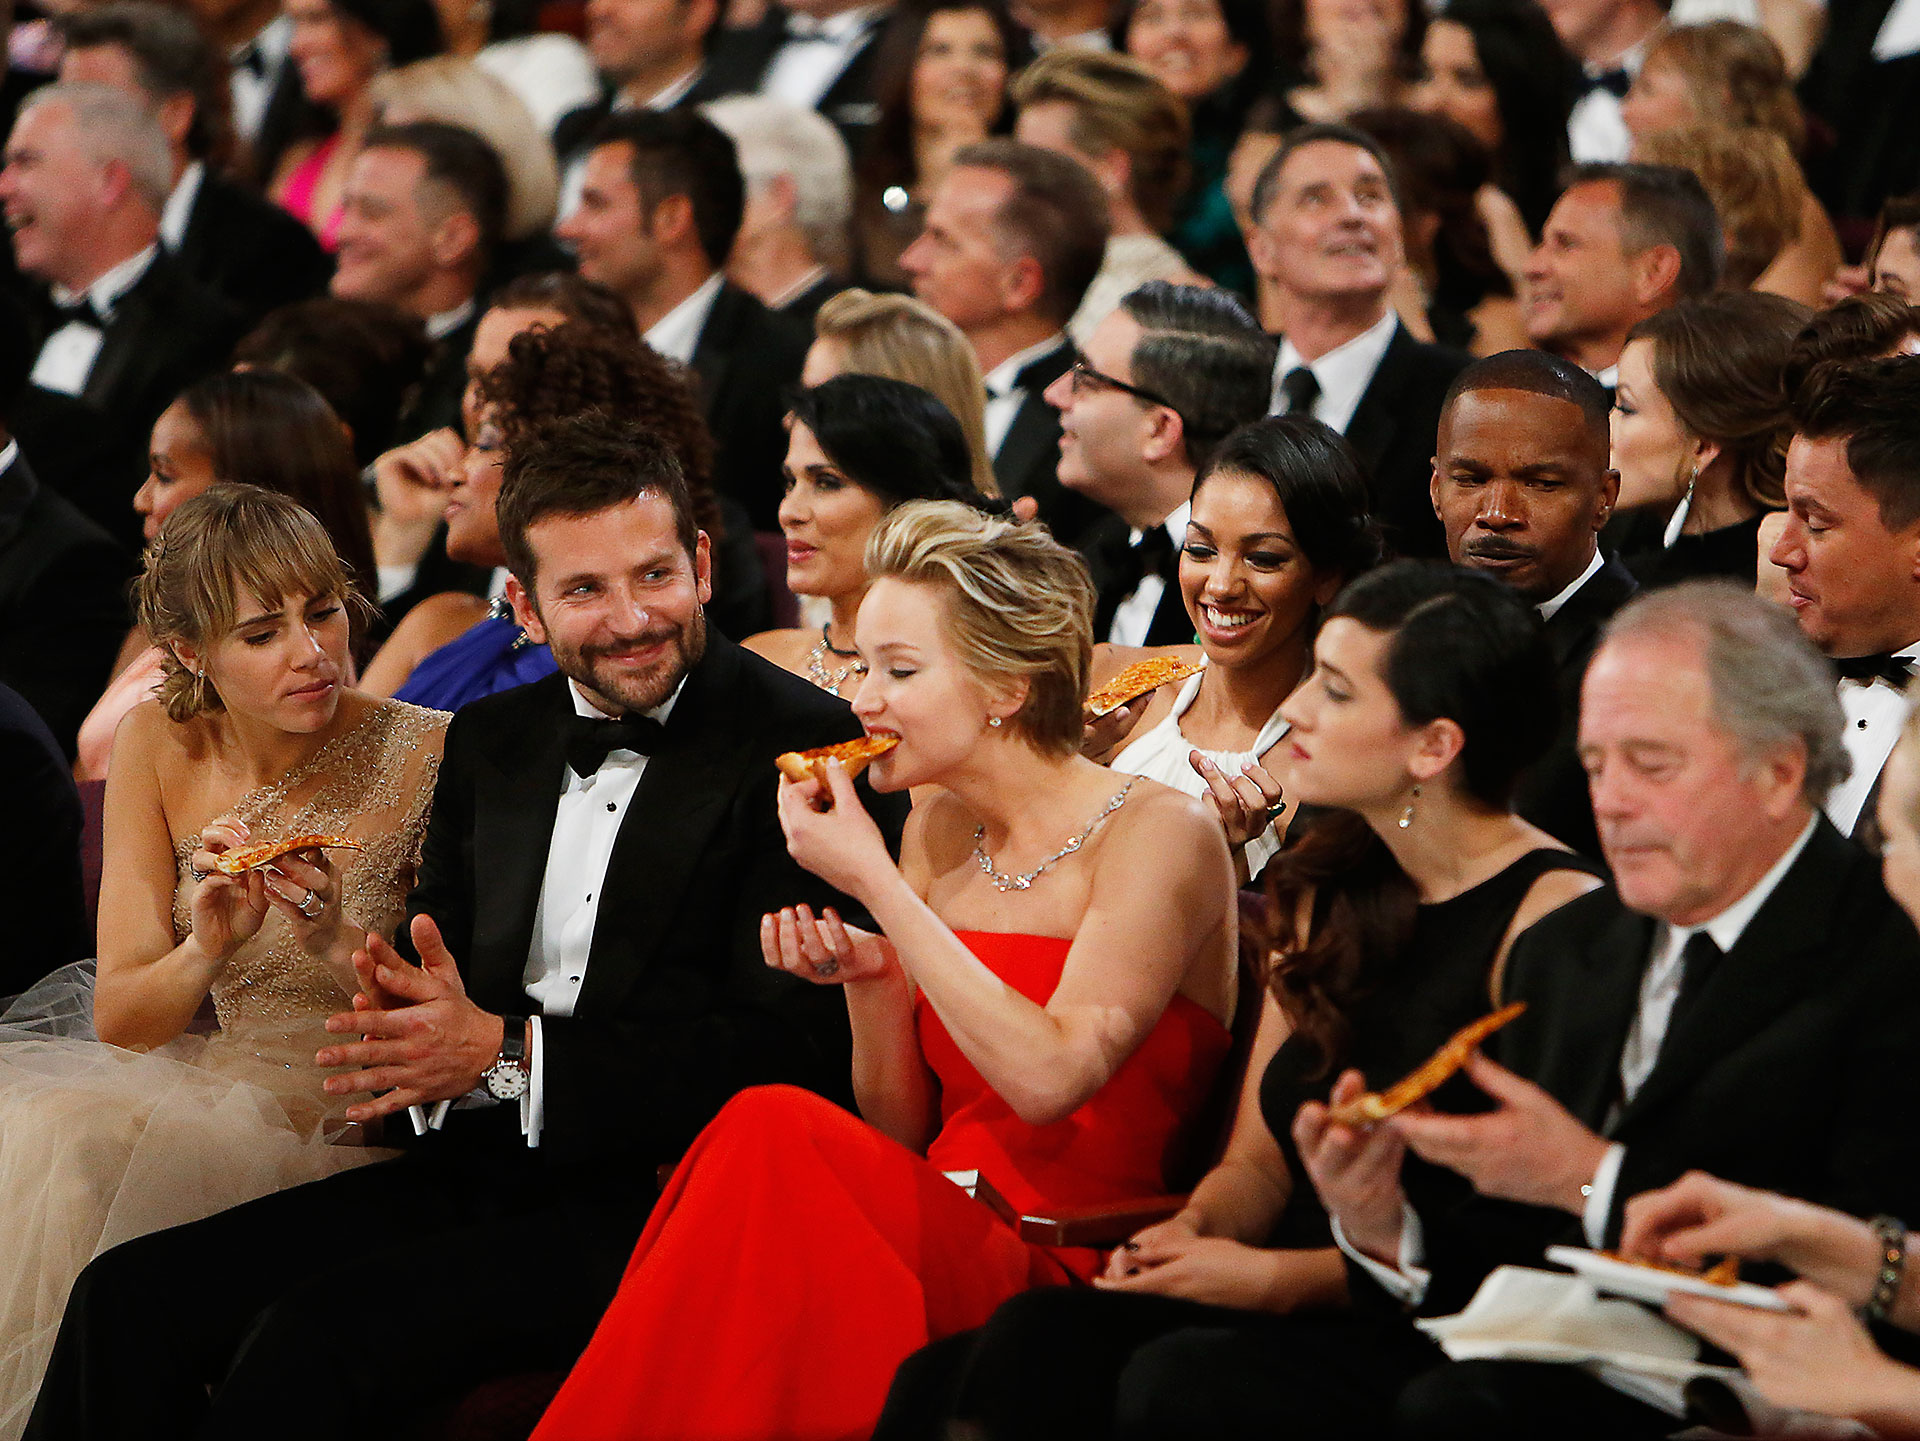 Jennifer Lawrence and Bradley Cooper eat pizza at the Oscars